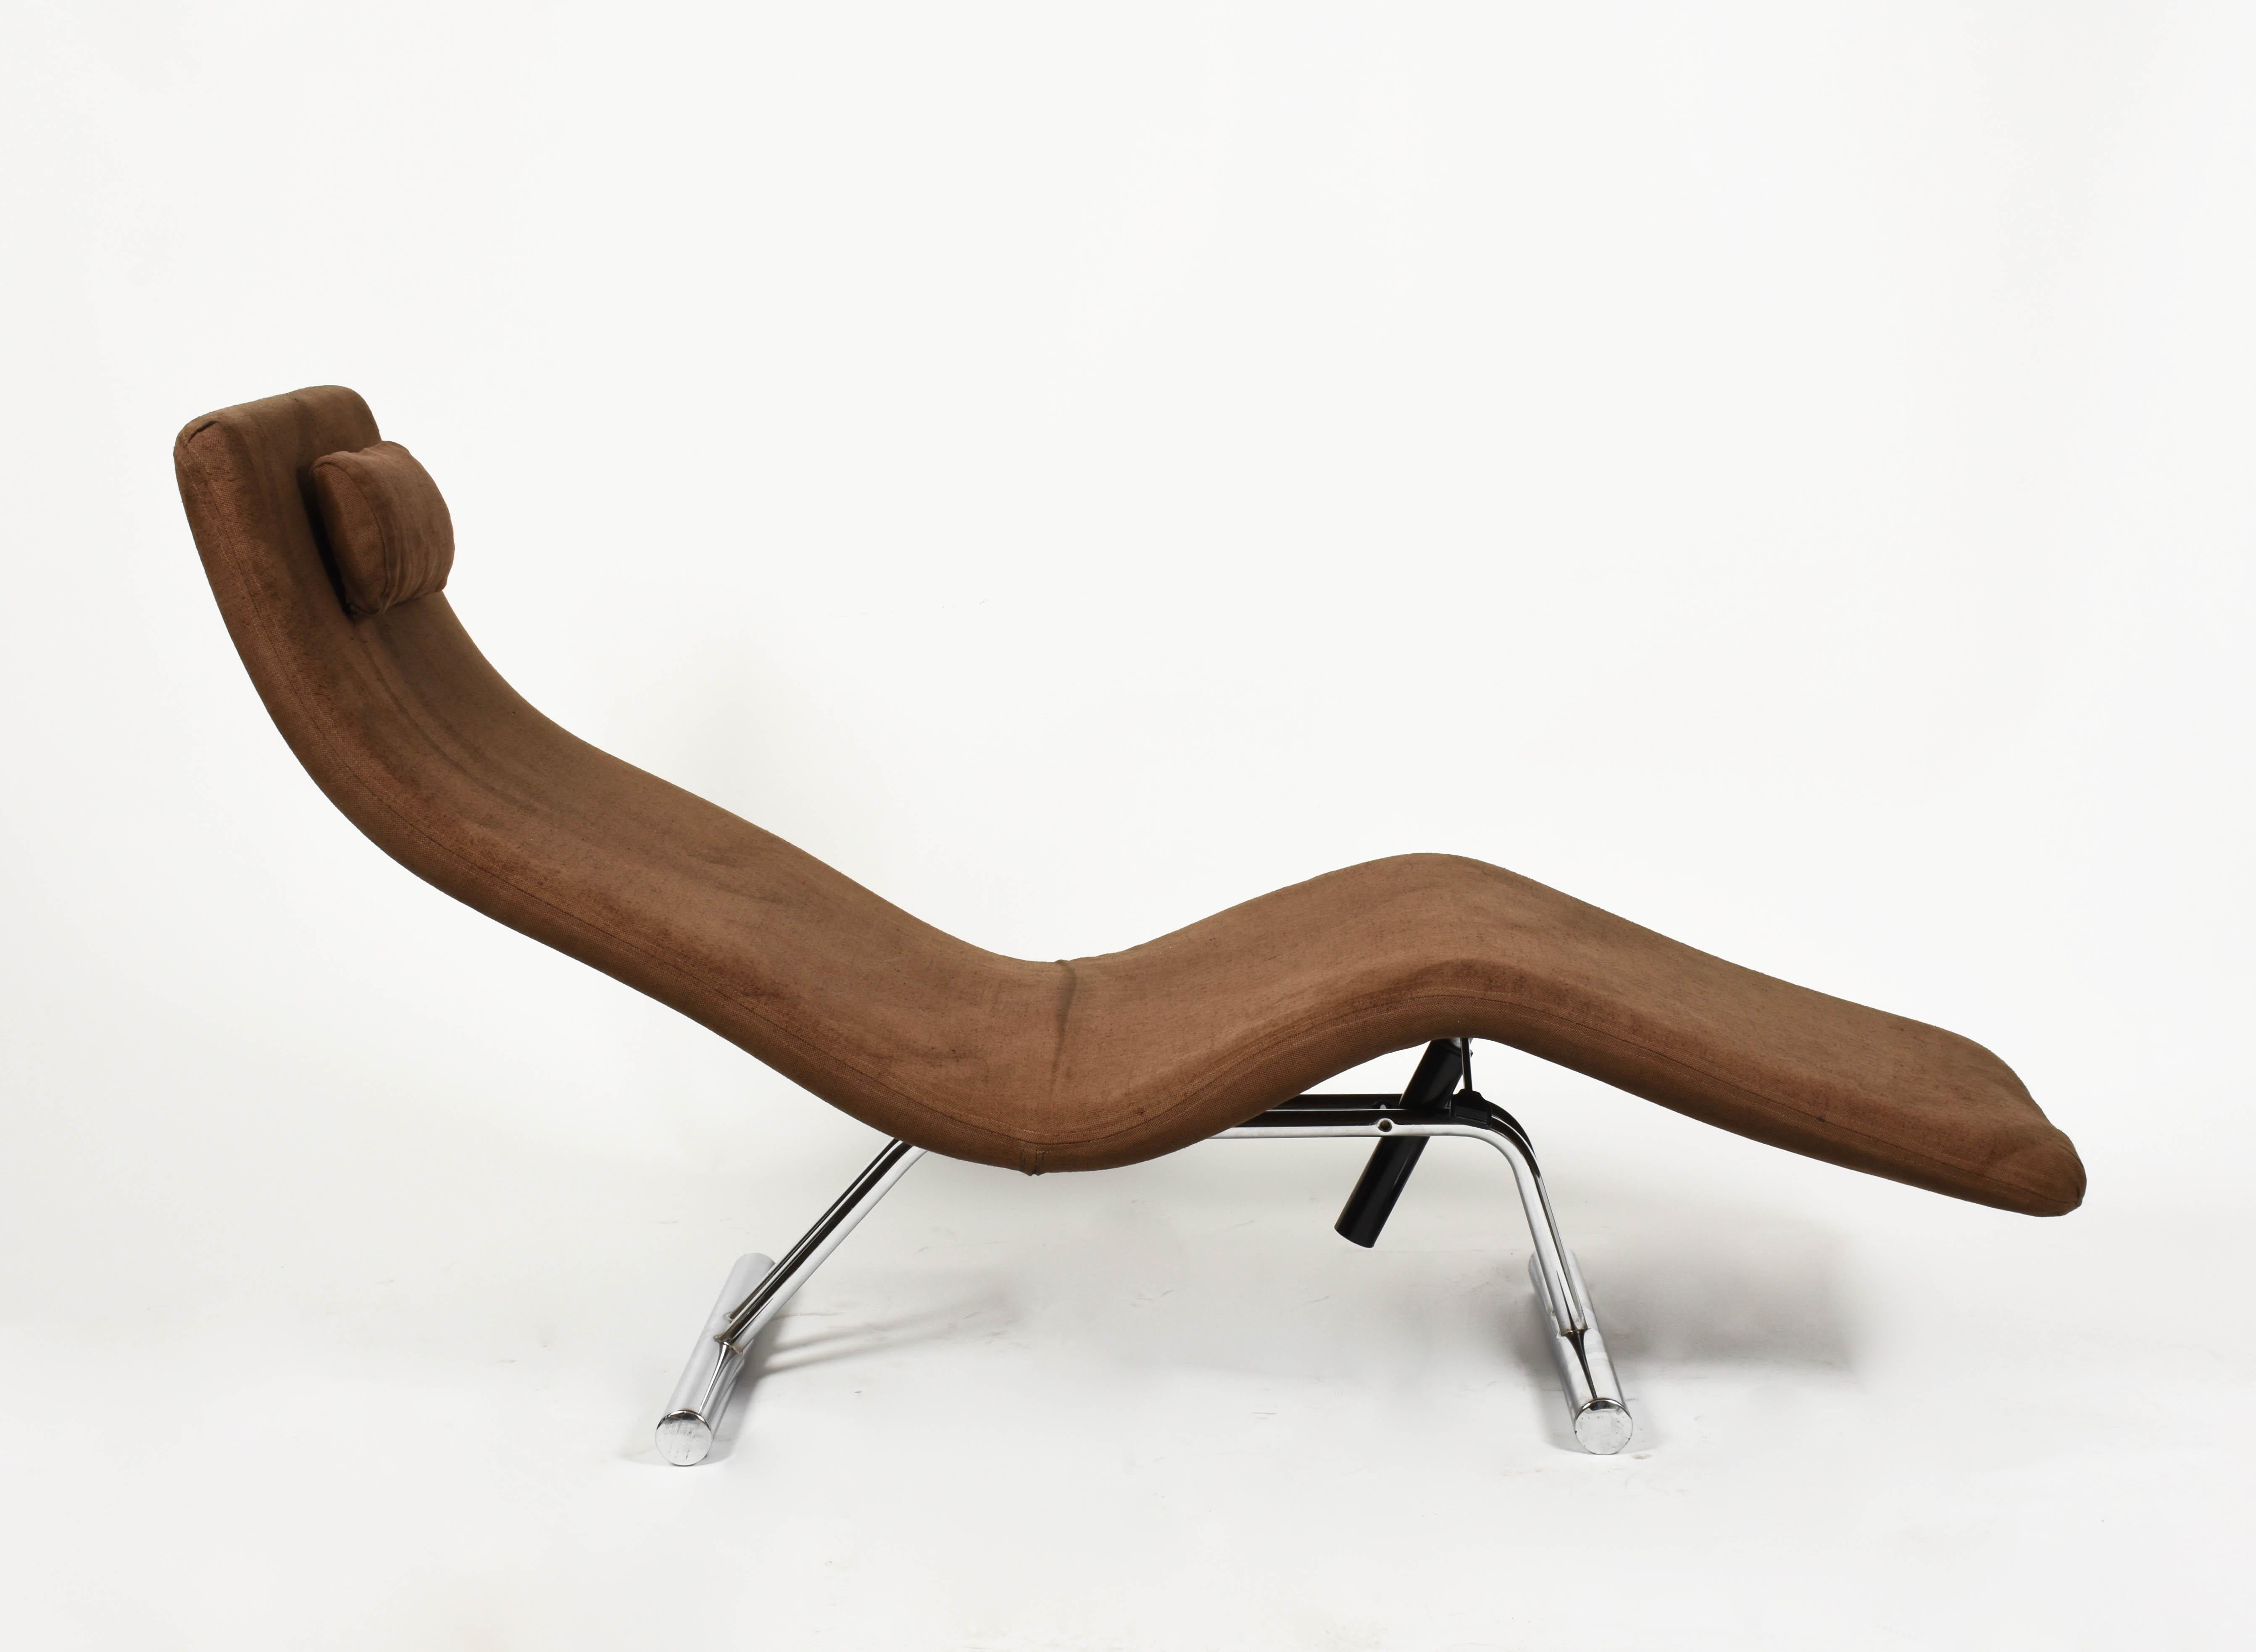 Midcentury Brown Fabric and Chrome Steel Chaise Longue, Paul Tuttle Style, 1980s For Sale 4